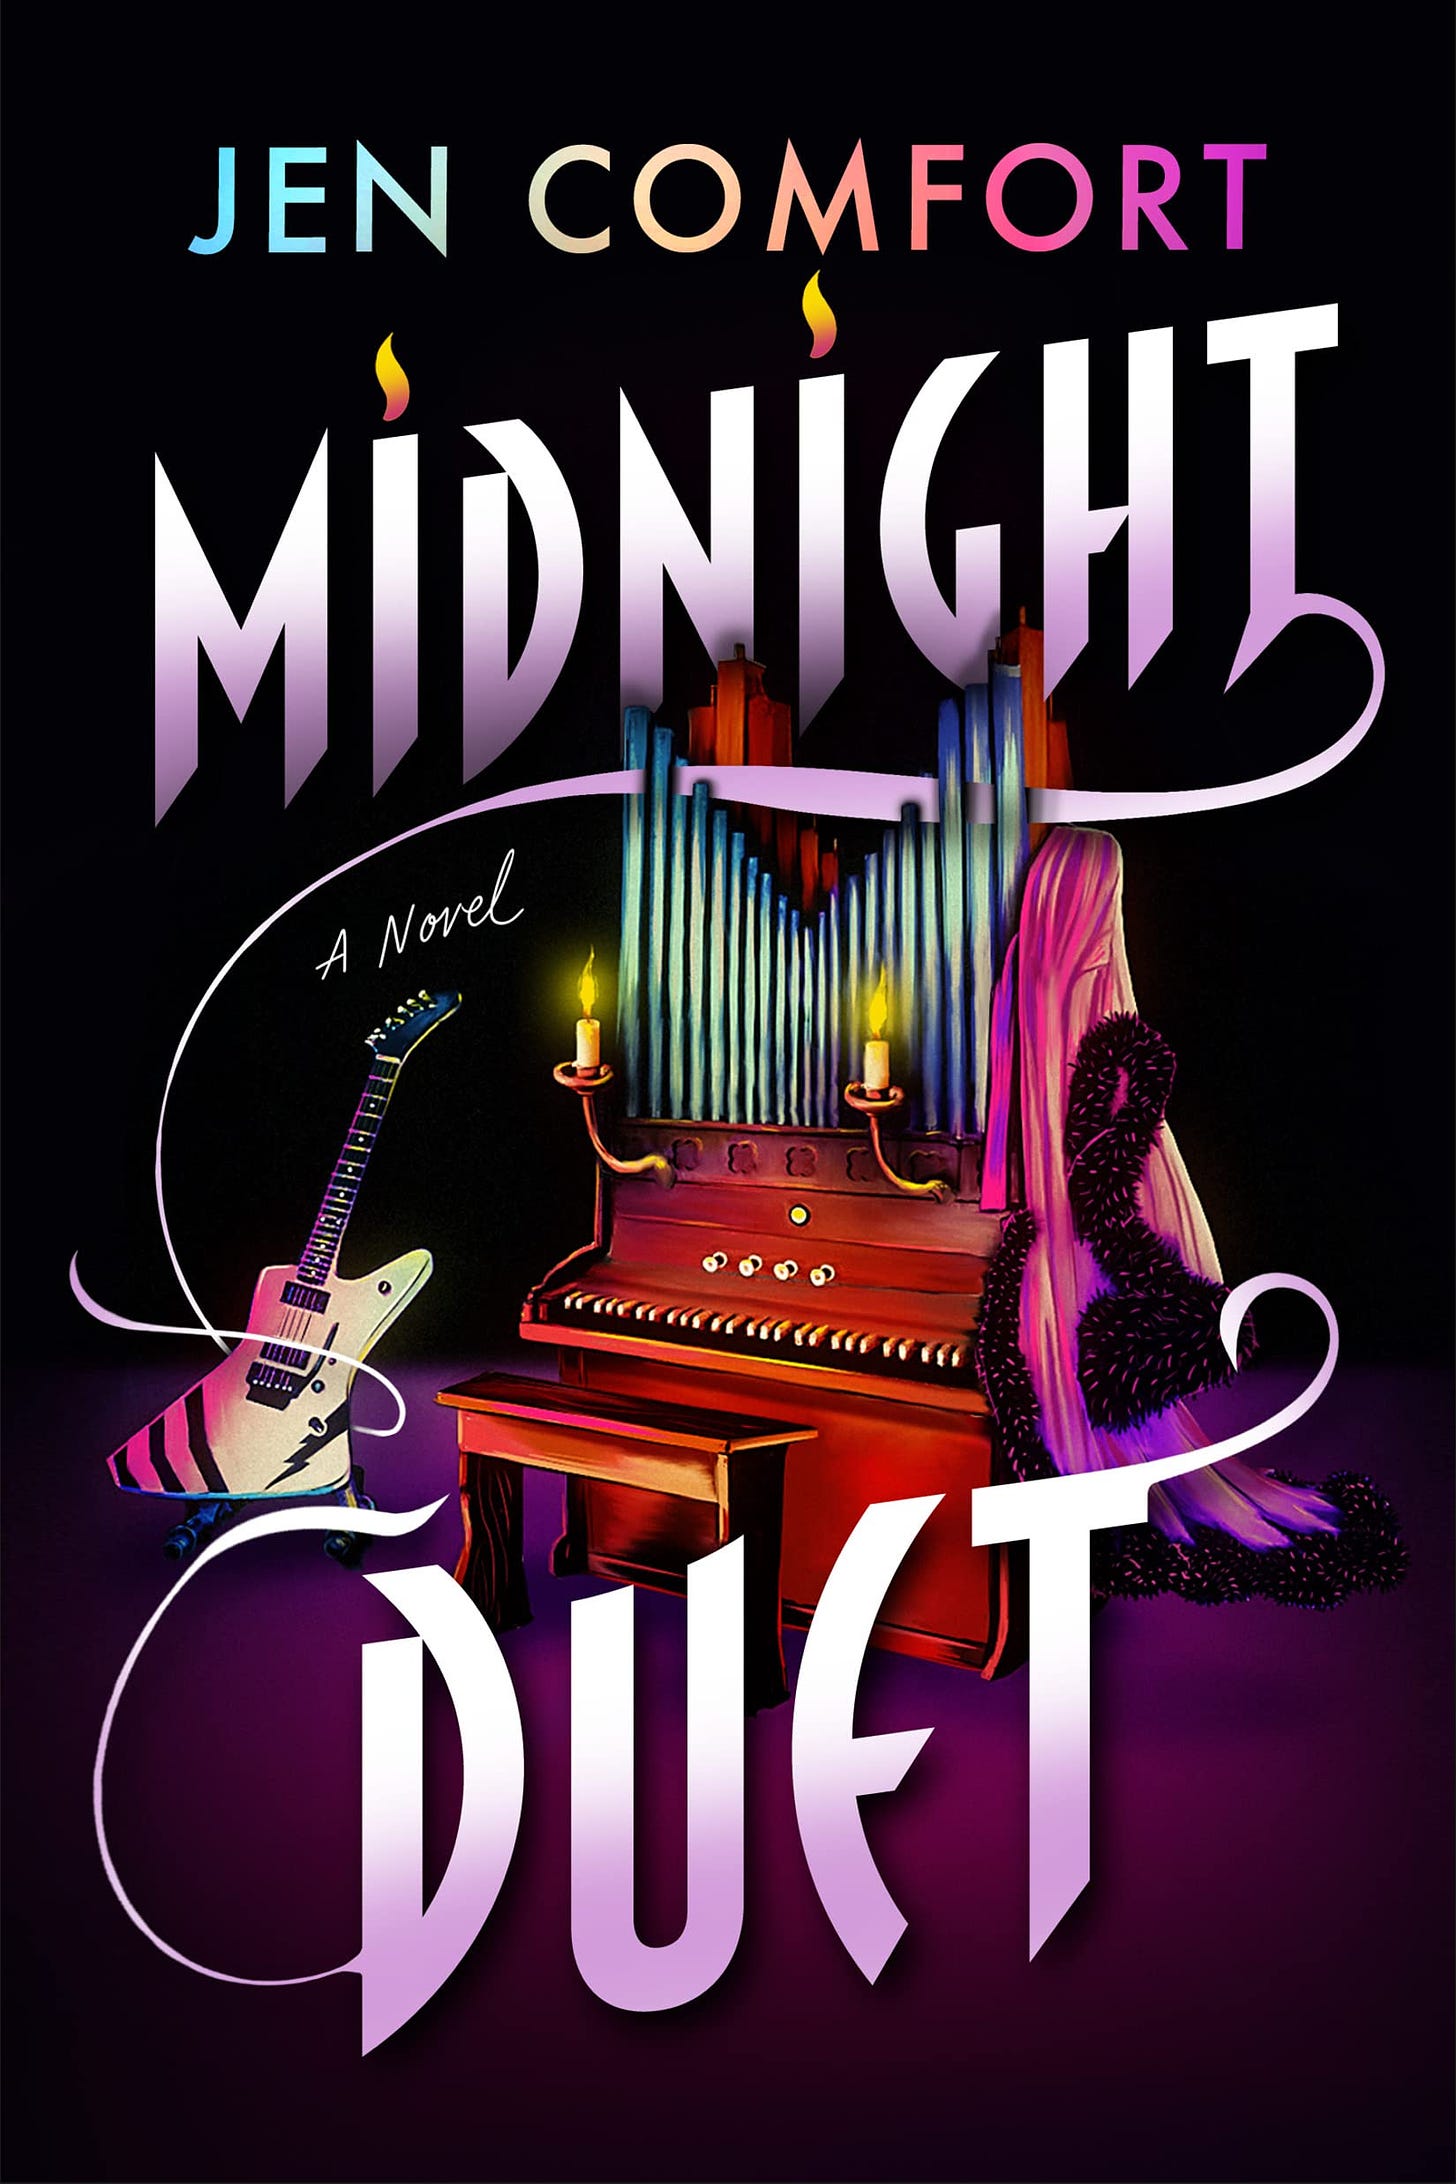 Jen Comfort's book cover for Midnight Duet. There's a pipe organ, with an electric guitar nearby